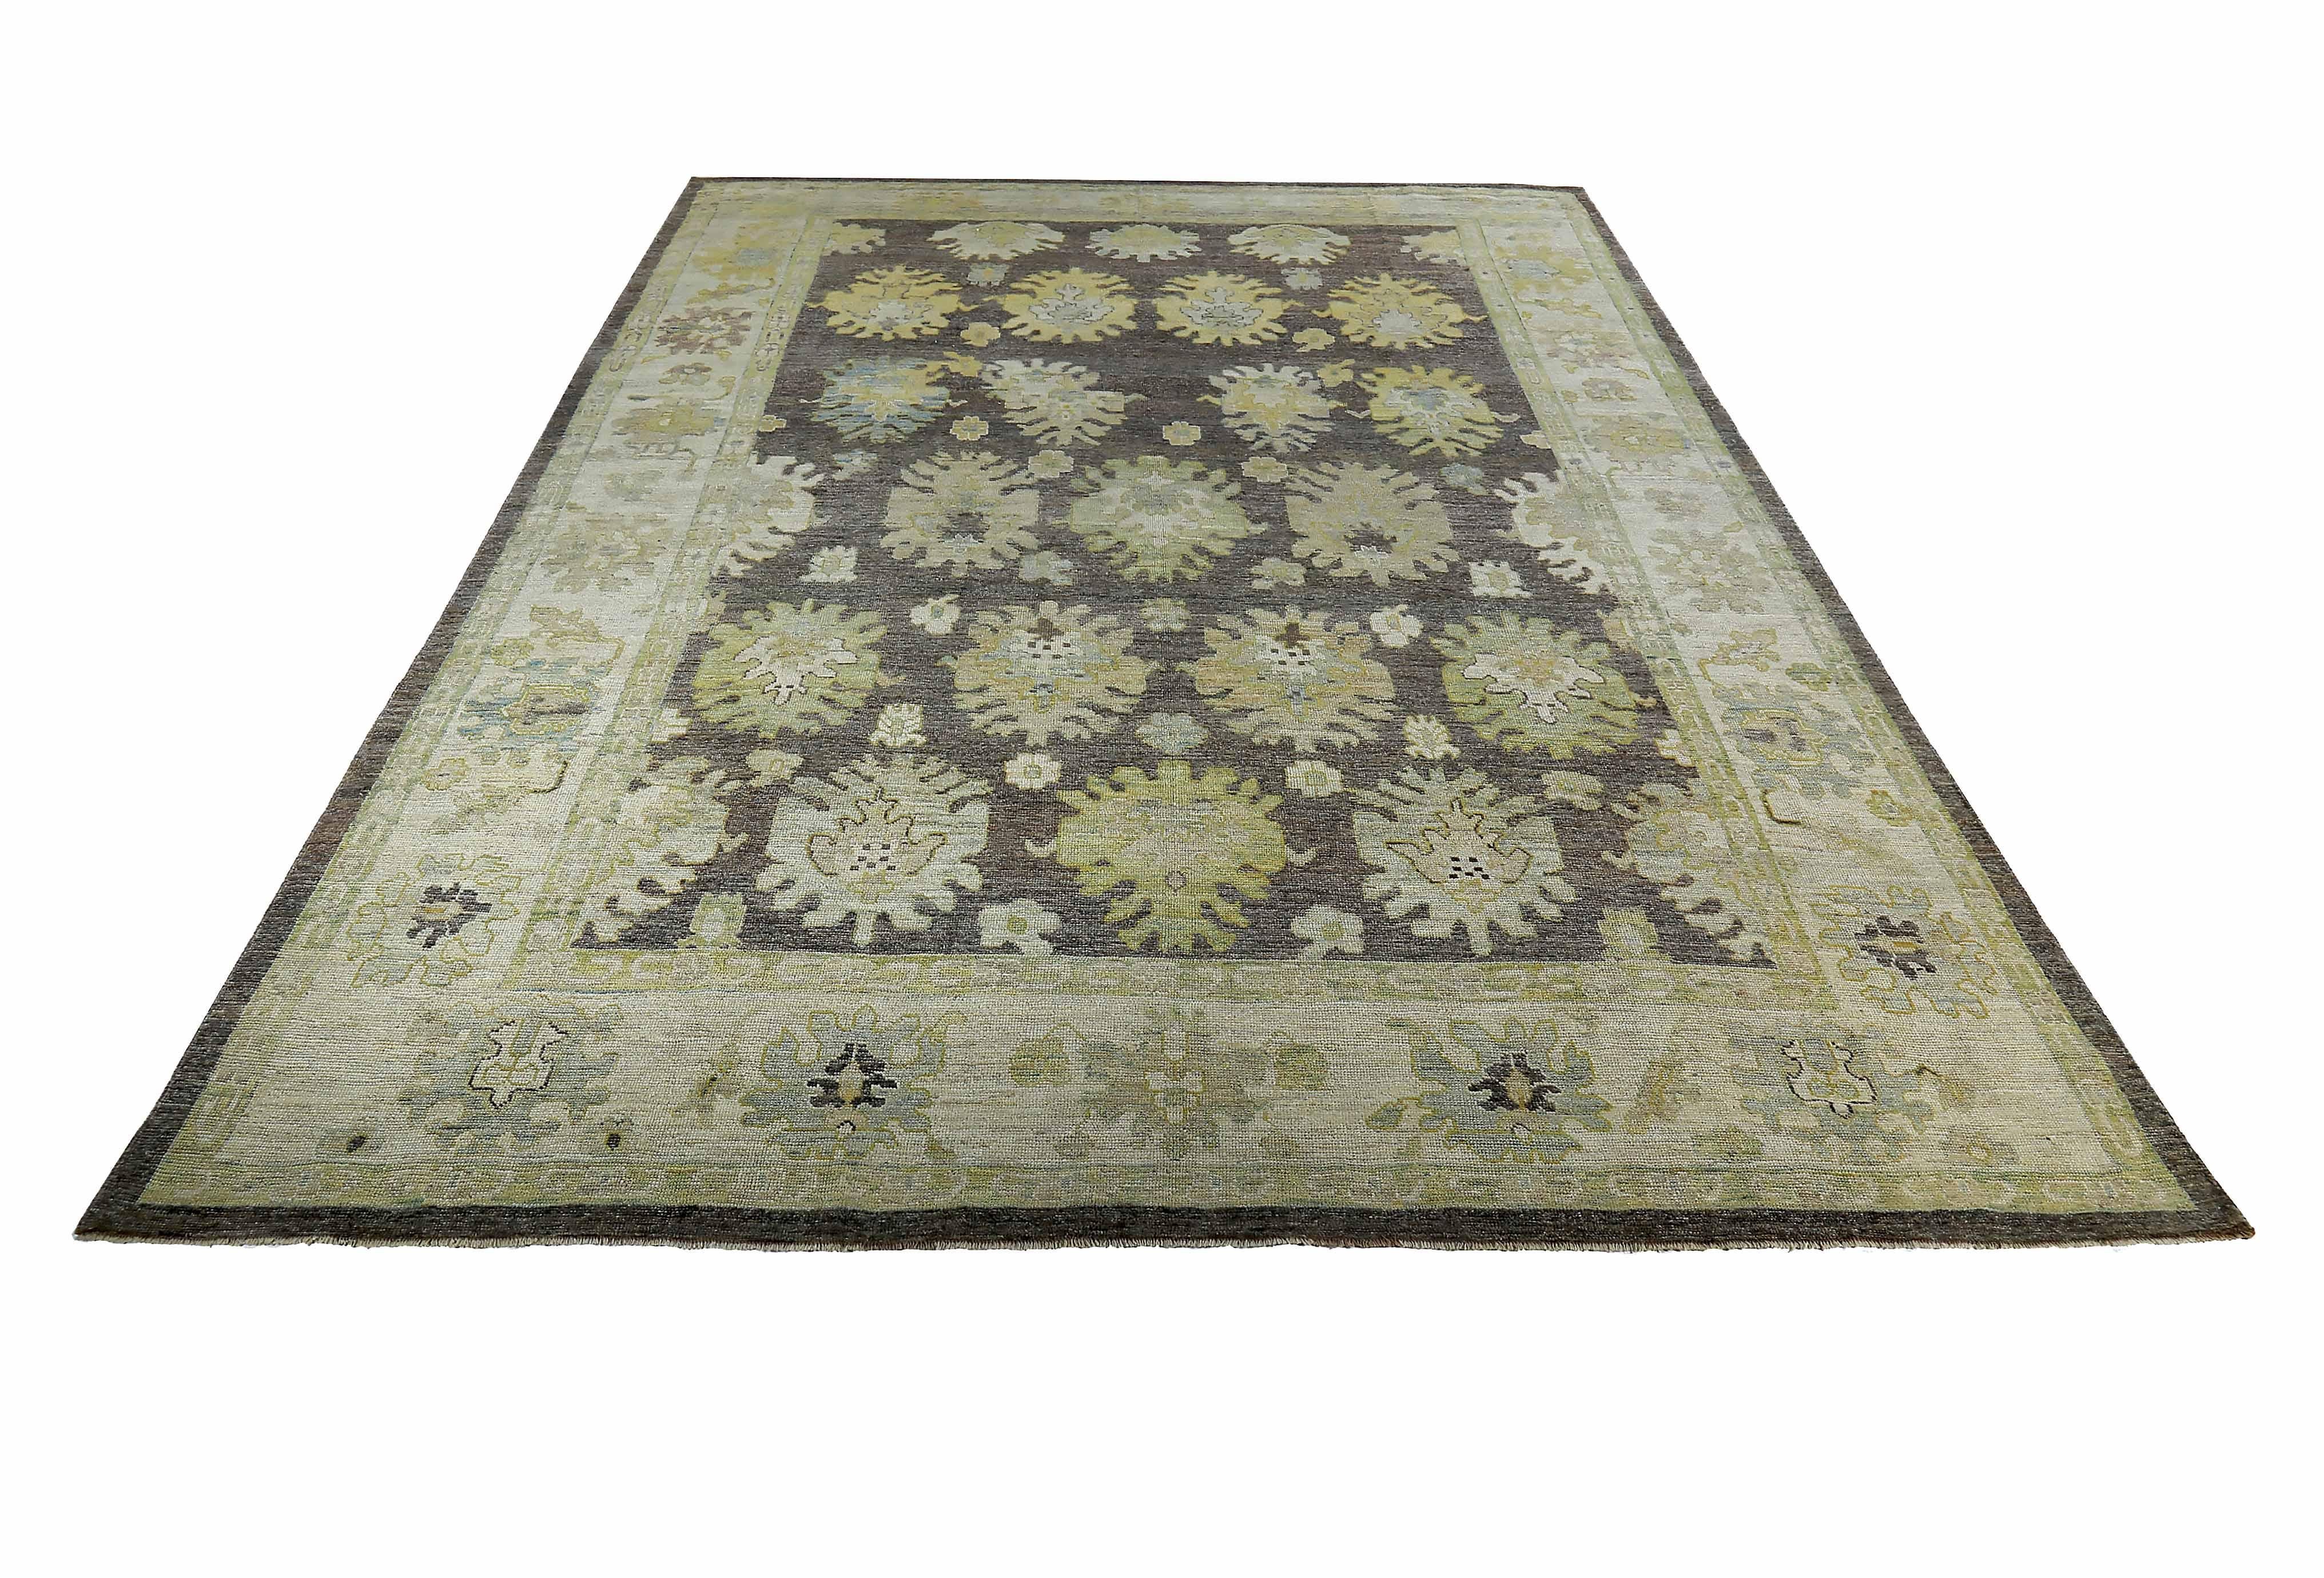 New Turkish rug made of handwoven sheep’s wool of the finest quality. It’s colored with organic vegetable dyes that are certified safe for humans and pets alike. It features ivory and gold flower heads adorning a rich brown field. Flower patterns